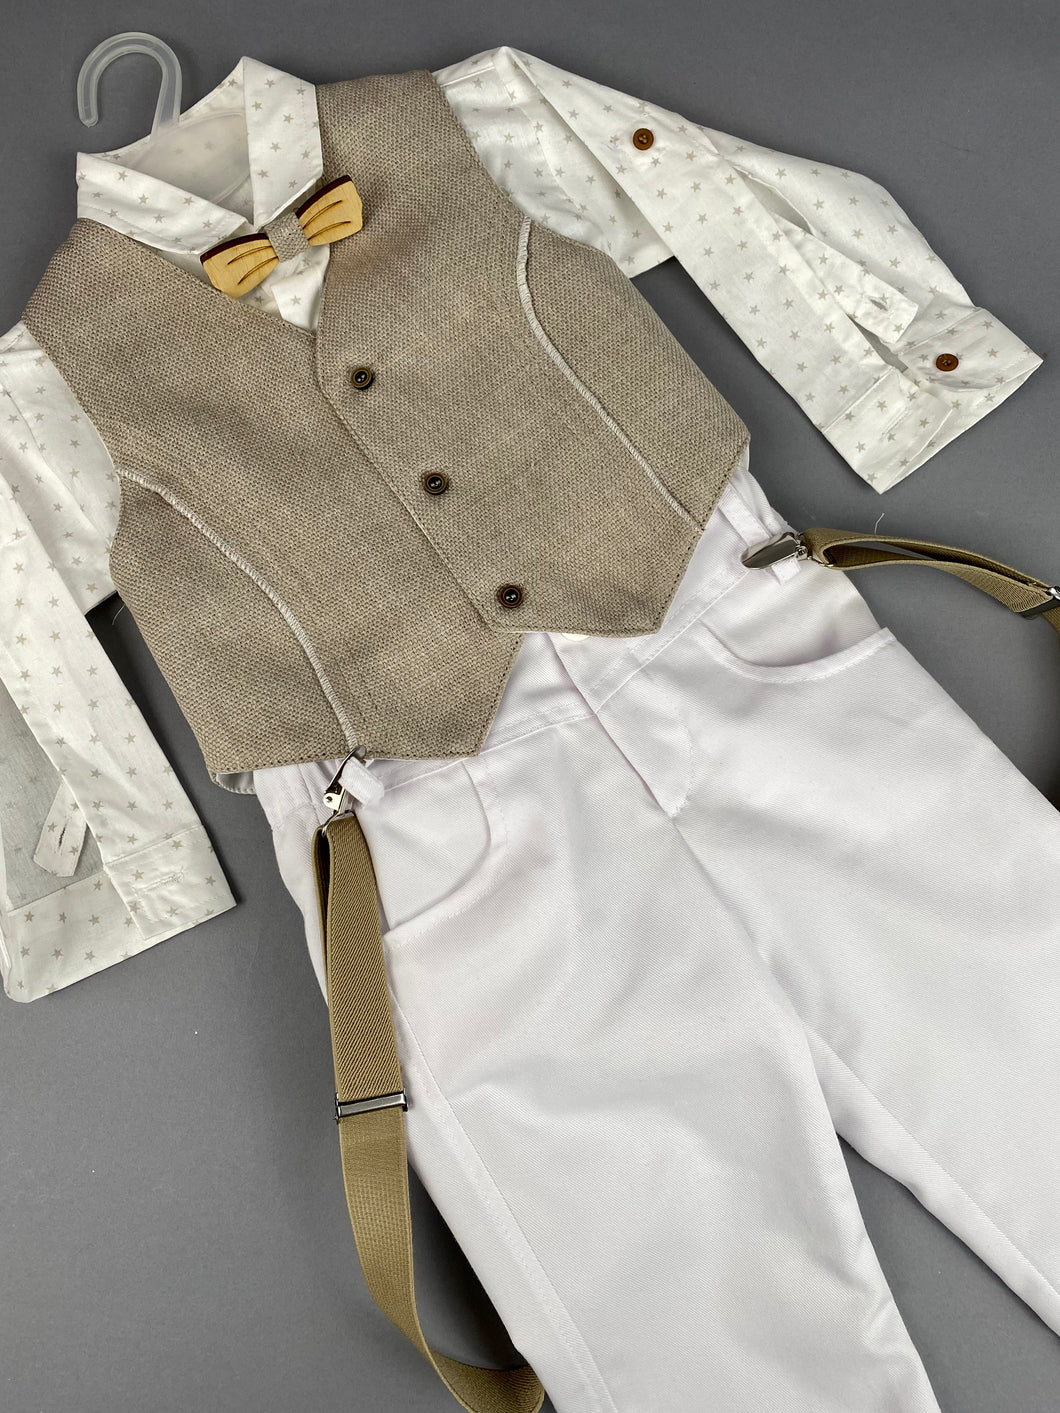 Rosies Collections 6pc Suit, Pants, Vest, Dress Shirt, Wooden Bow Tie, Suspenders and Fedora made in Greece,  exclusively for Rosies Collections. S202339